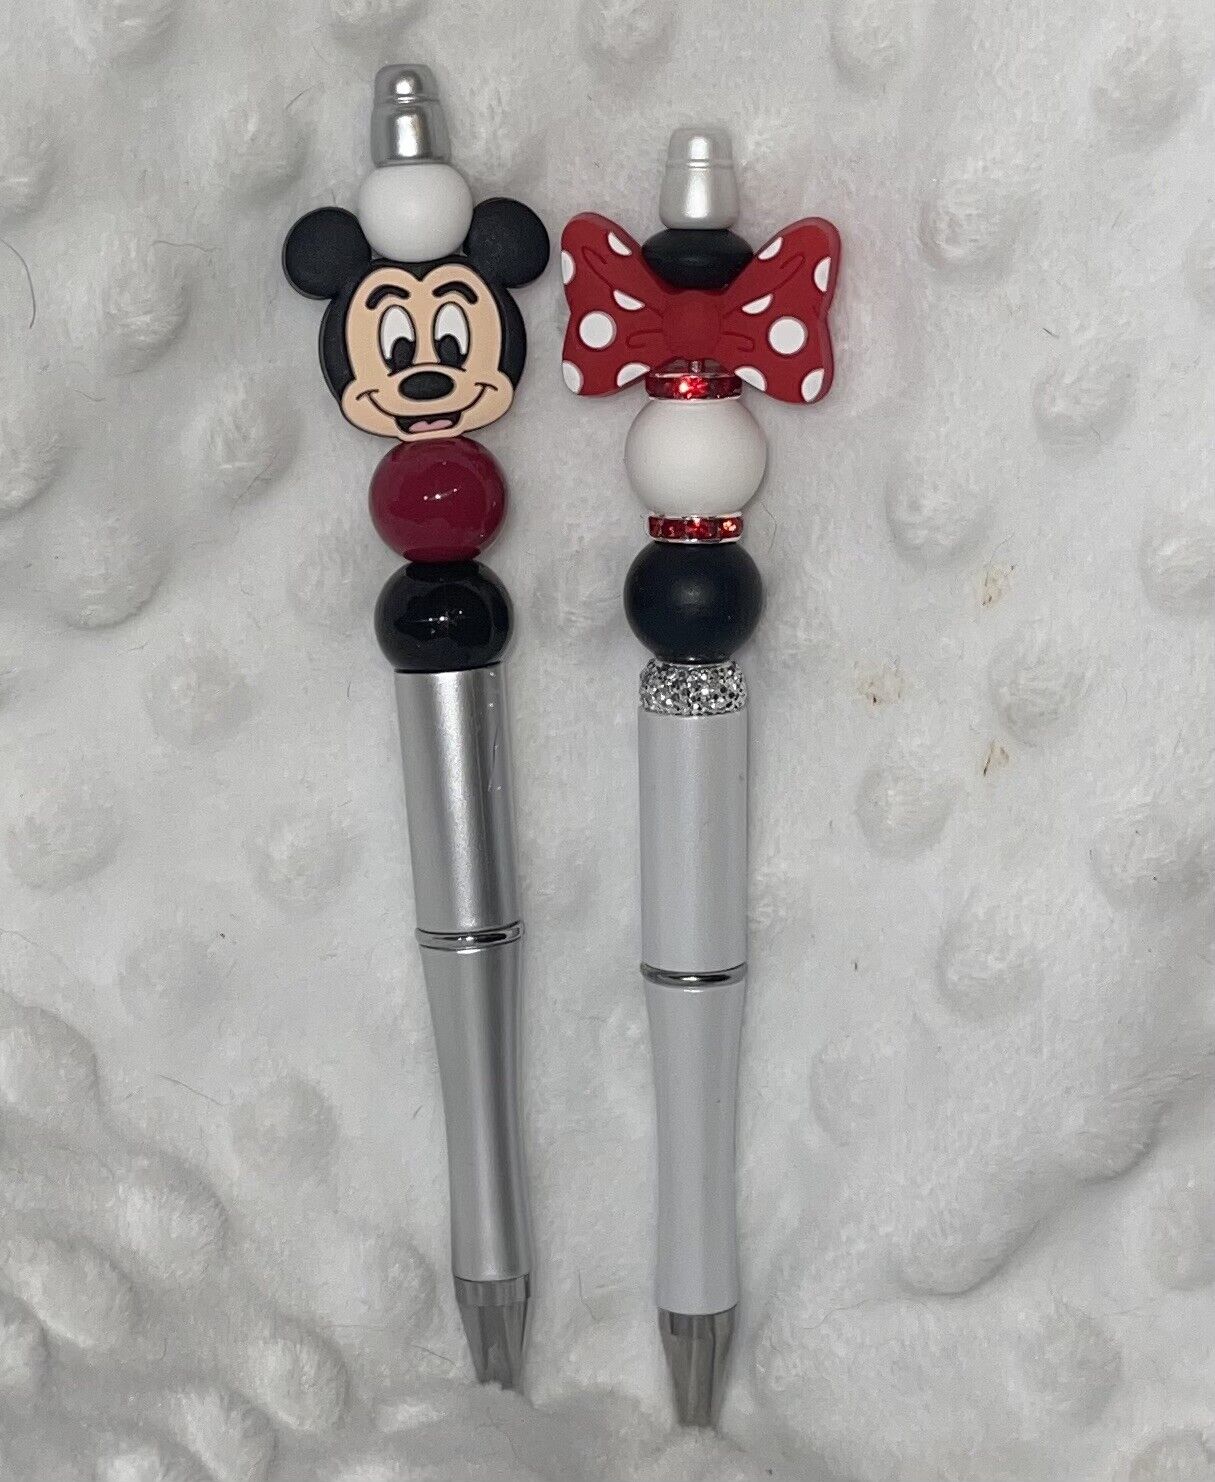 Custom Bling Mickey Minnie Mouse  Beaded Pen Set of 2, Black Ink, Free Refill